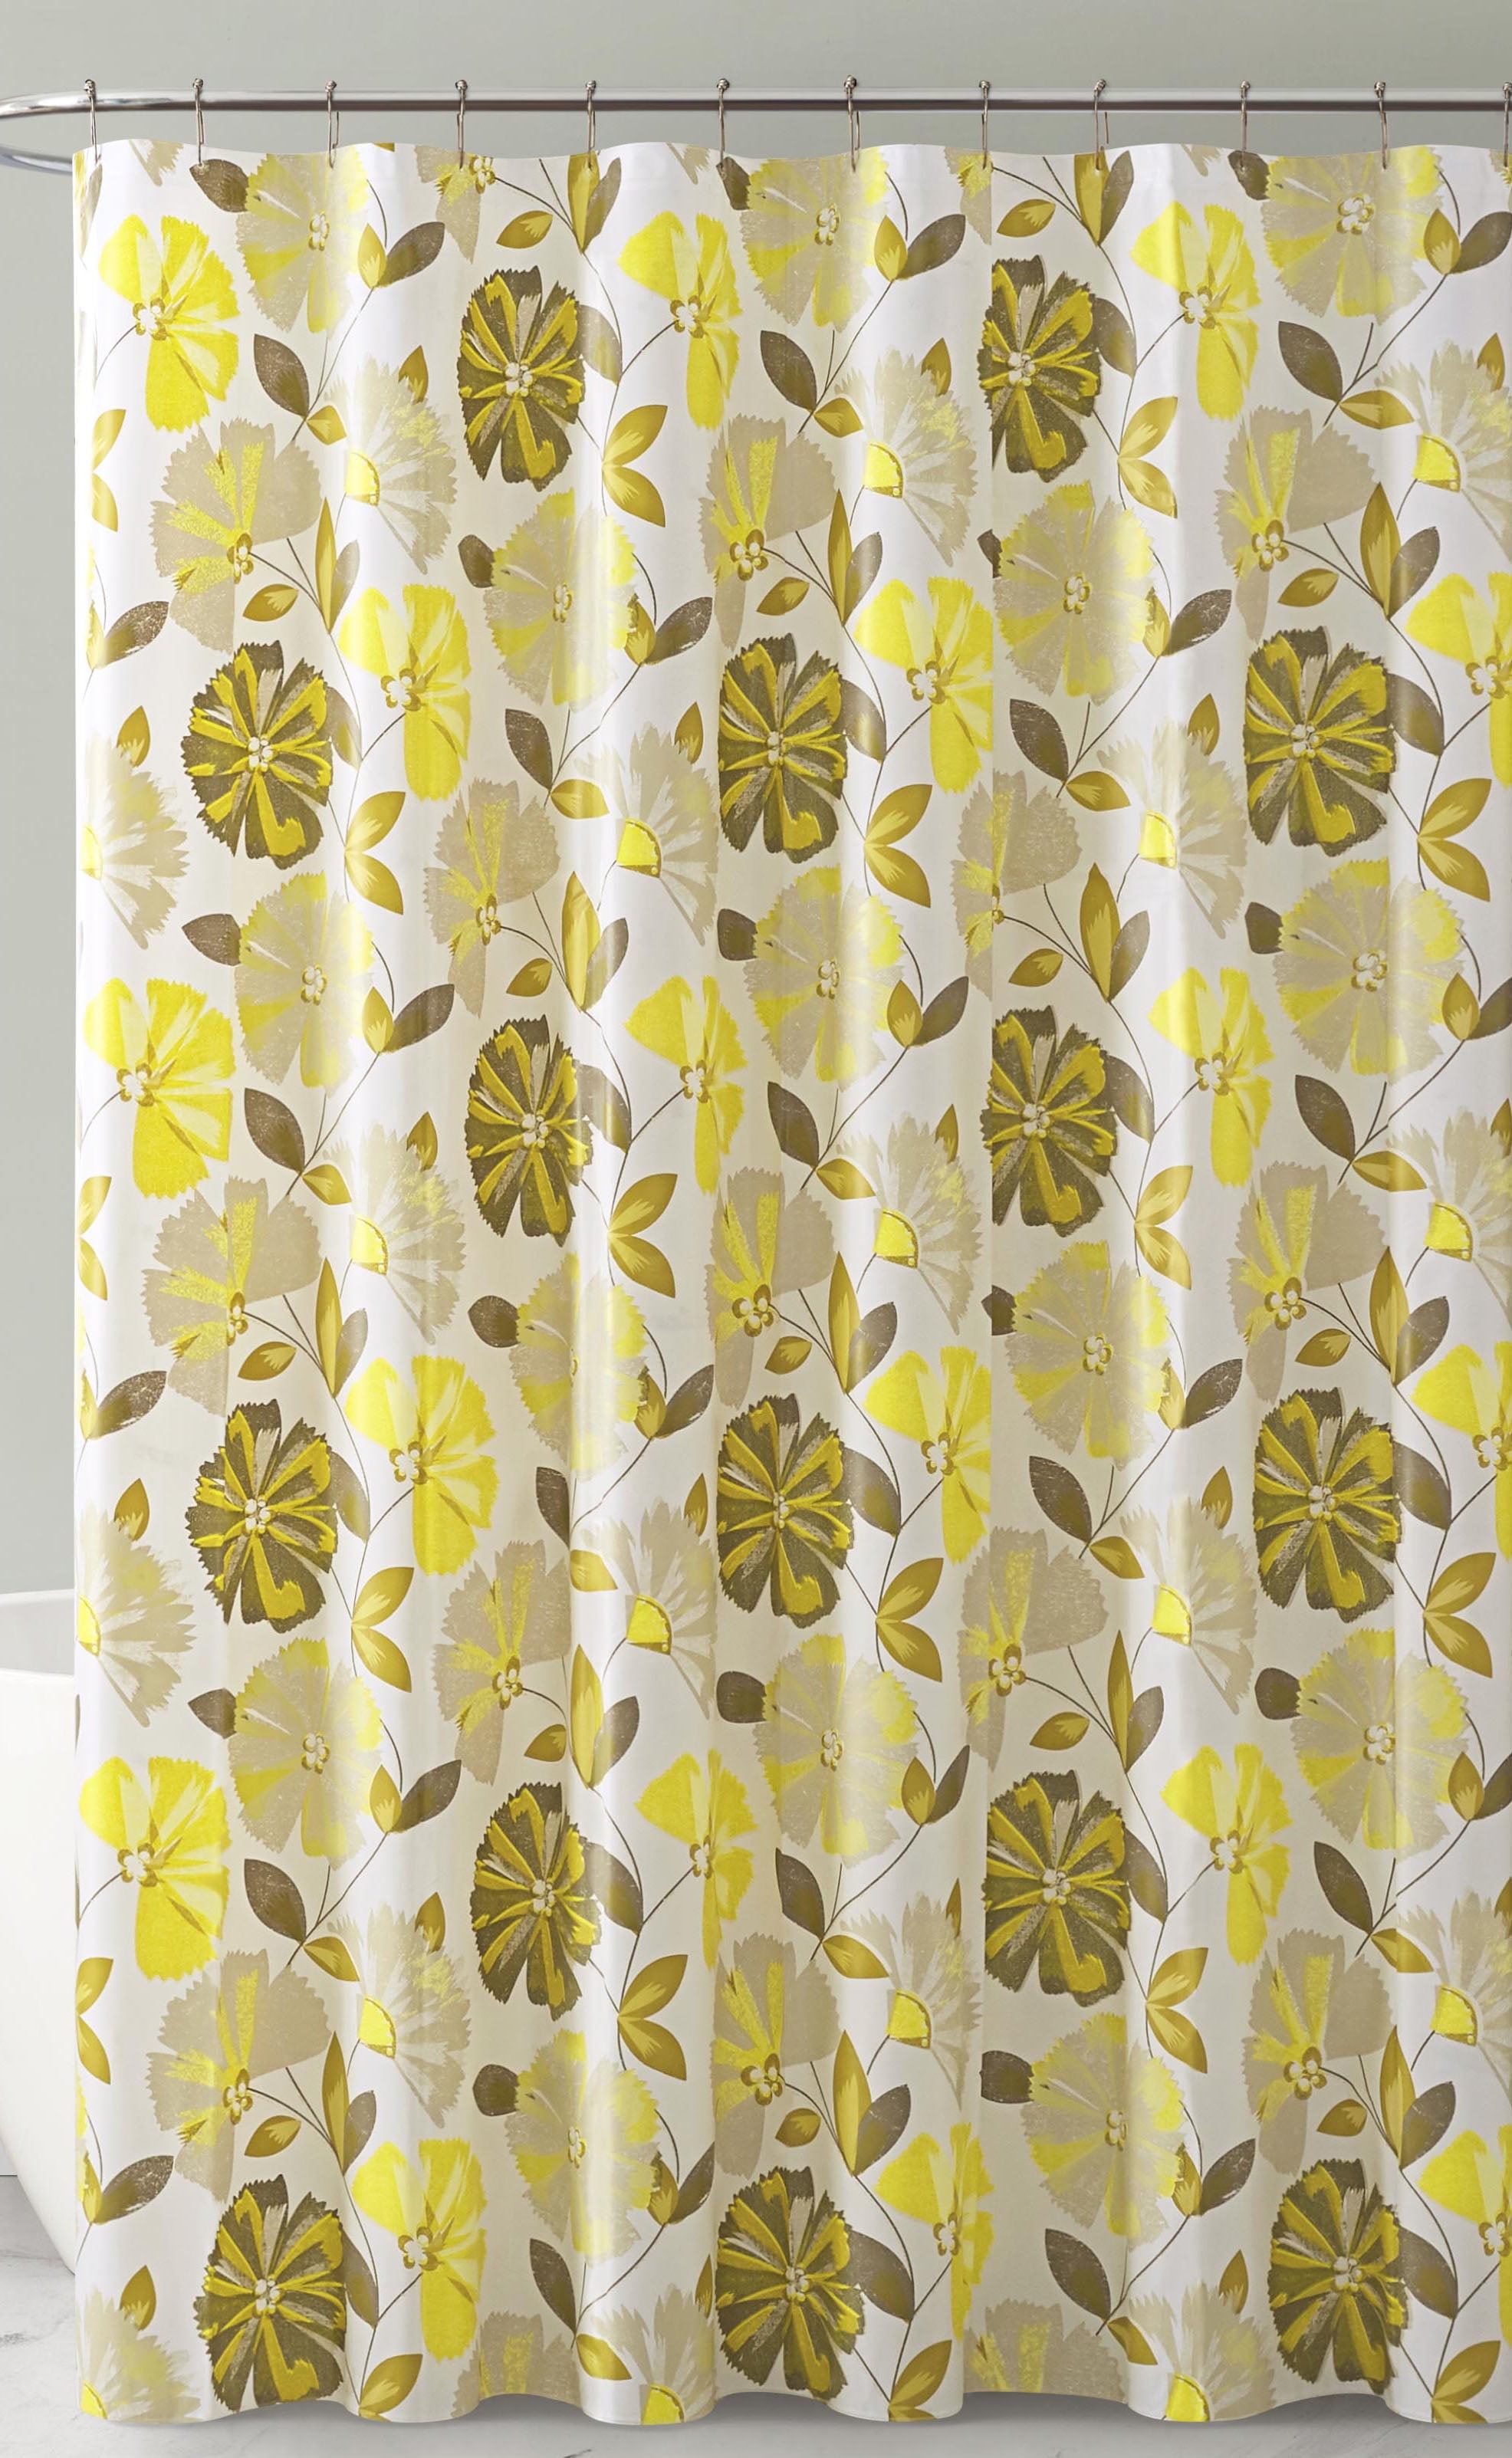 Grey and Yellow Camouflage Shower Curtain Bathroom Decor Fabric & 12hook 71 In 